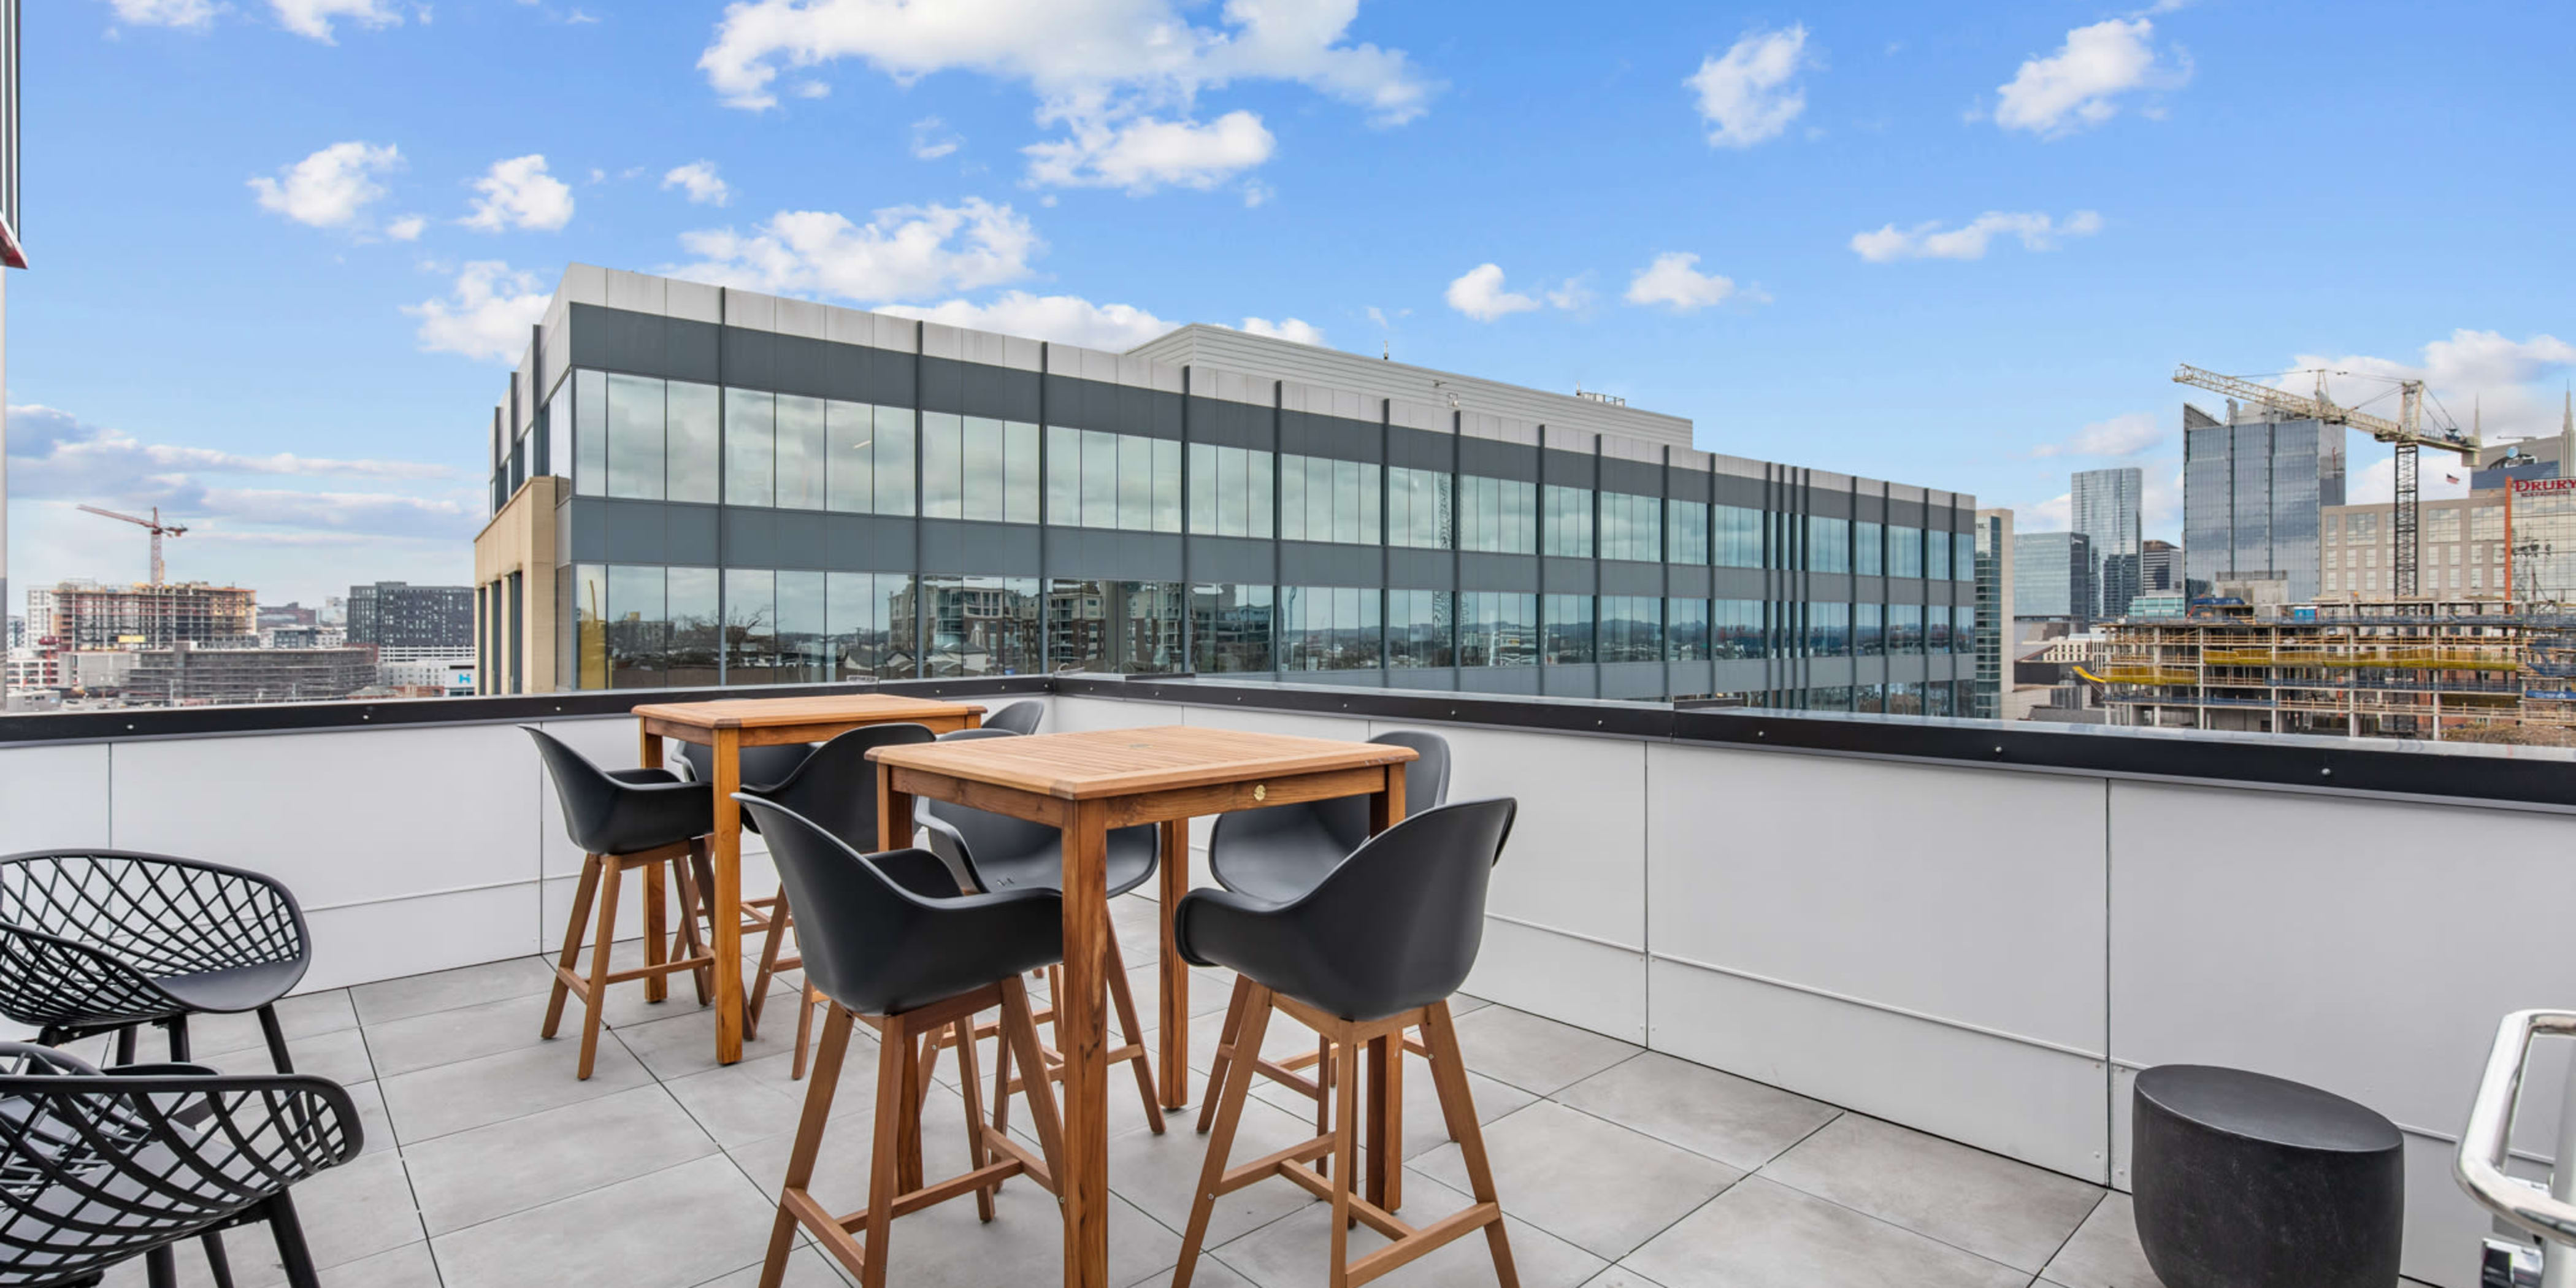 Terrace with seating and city views at Rutledge Flats | Apartments in Nashville, TN